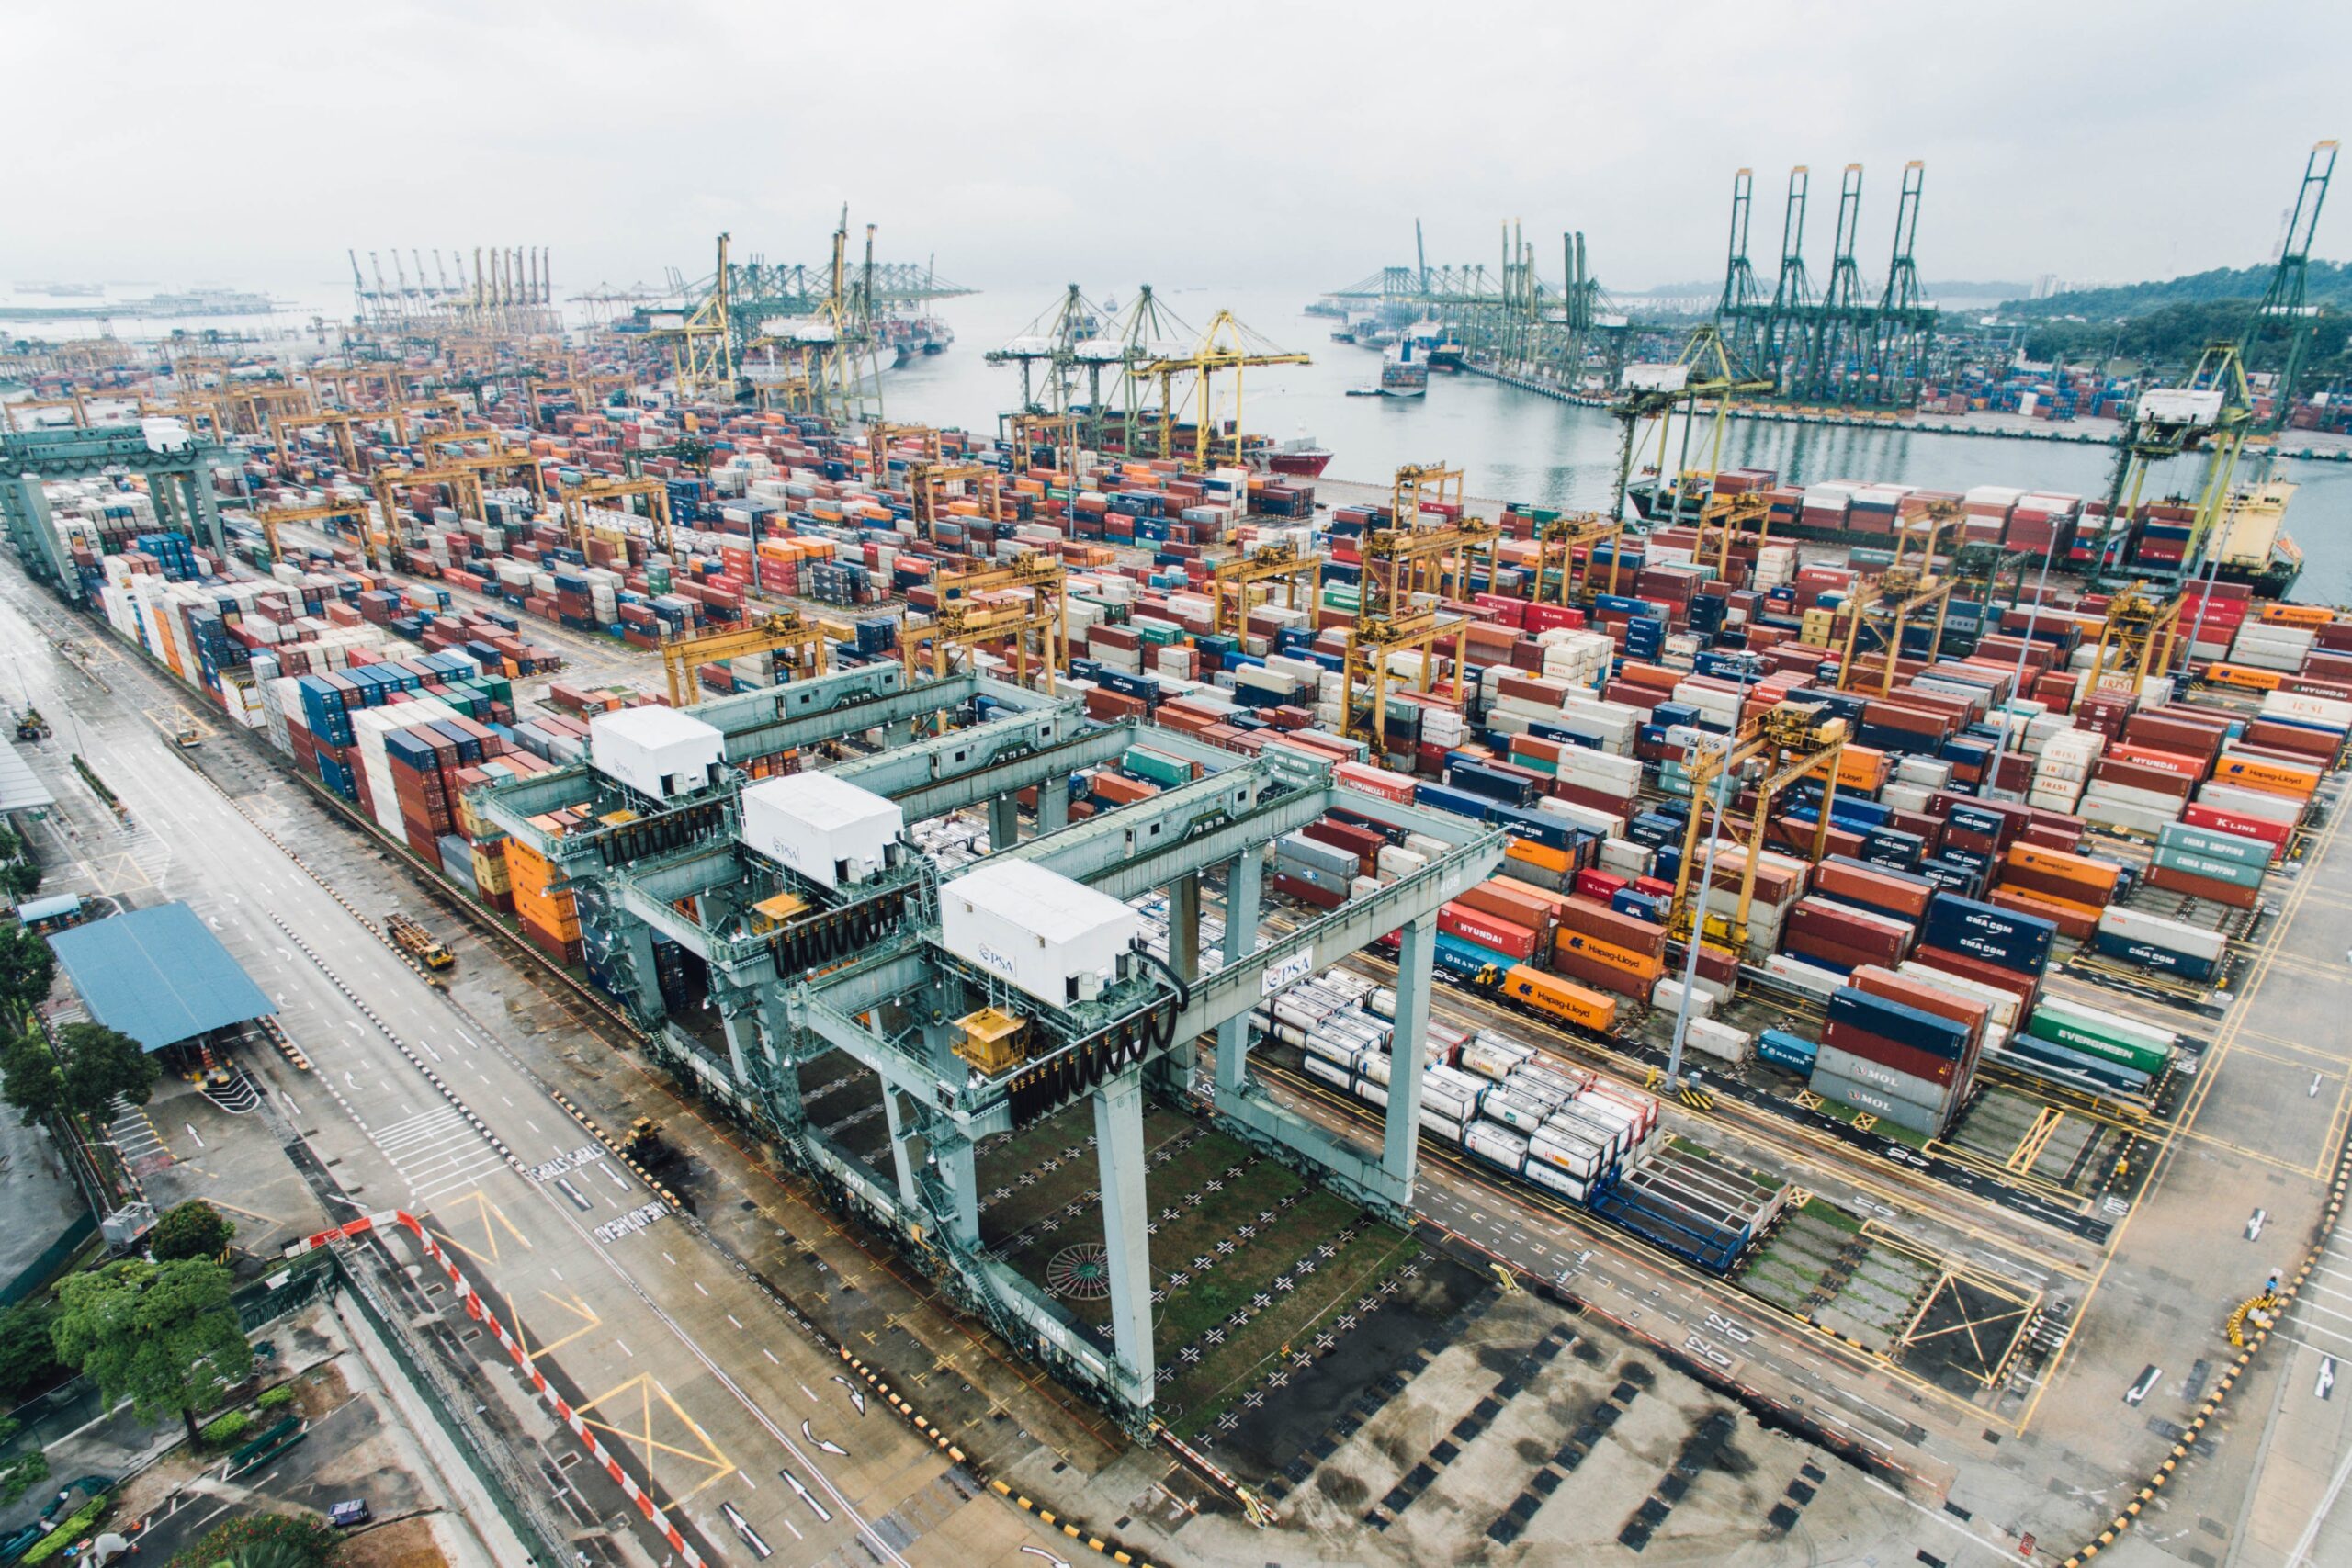 image of a container port